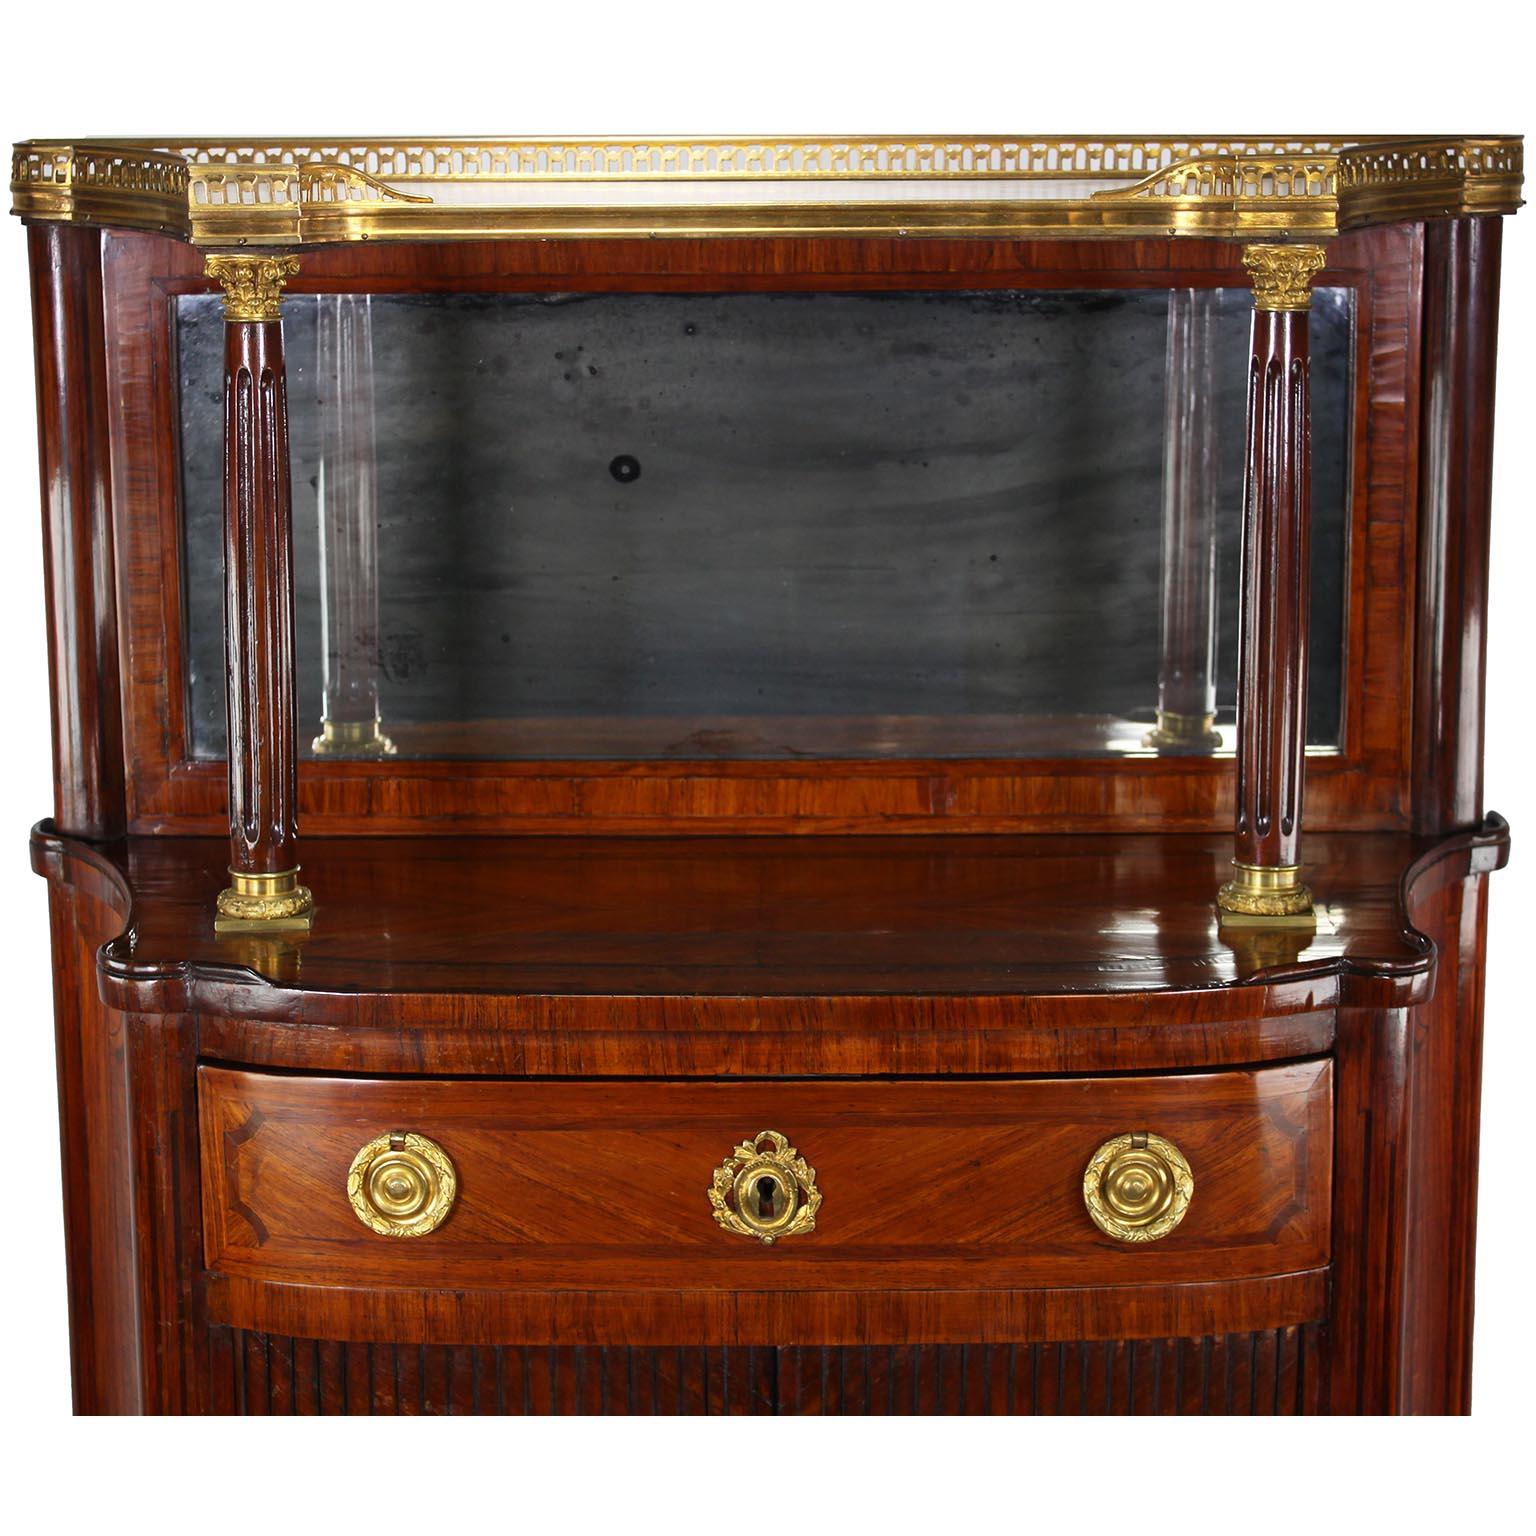 A French 19th Century Louis XVI Style Gilt-Bronze Mounted Meuble d'Appui Cabinet For Sale 4